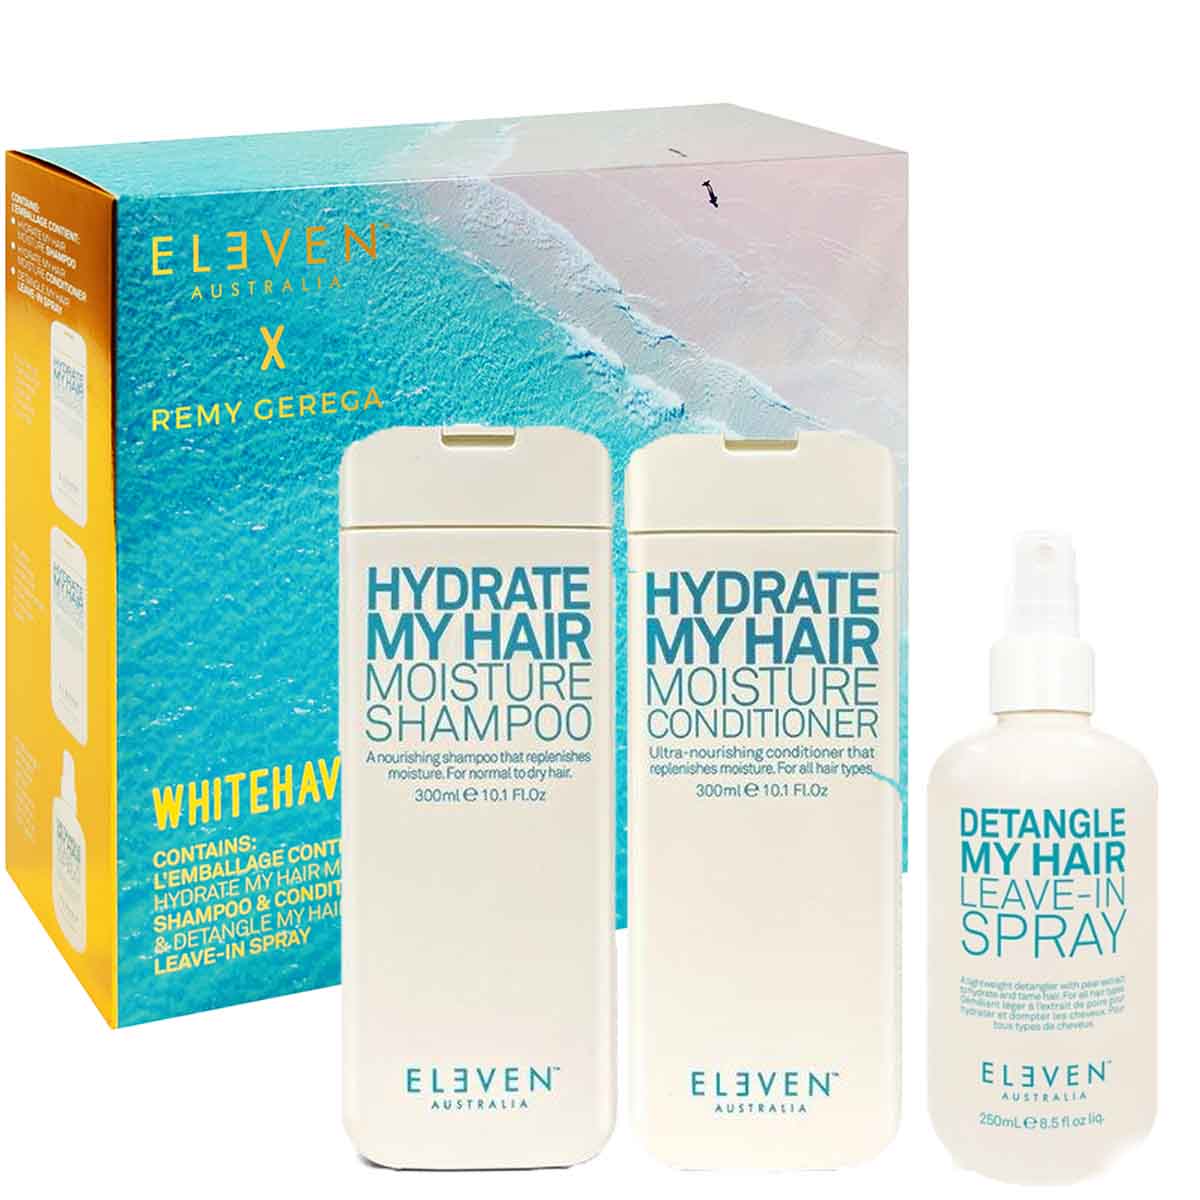 Eleven Box Whitehaven Hydrate My Hair - Hairsale.se